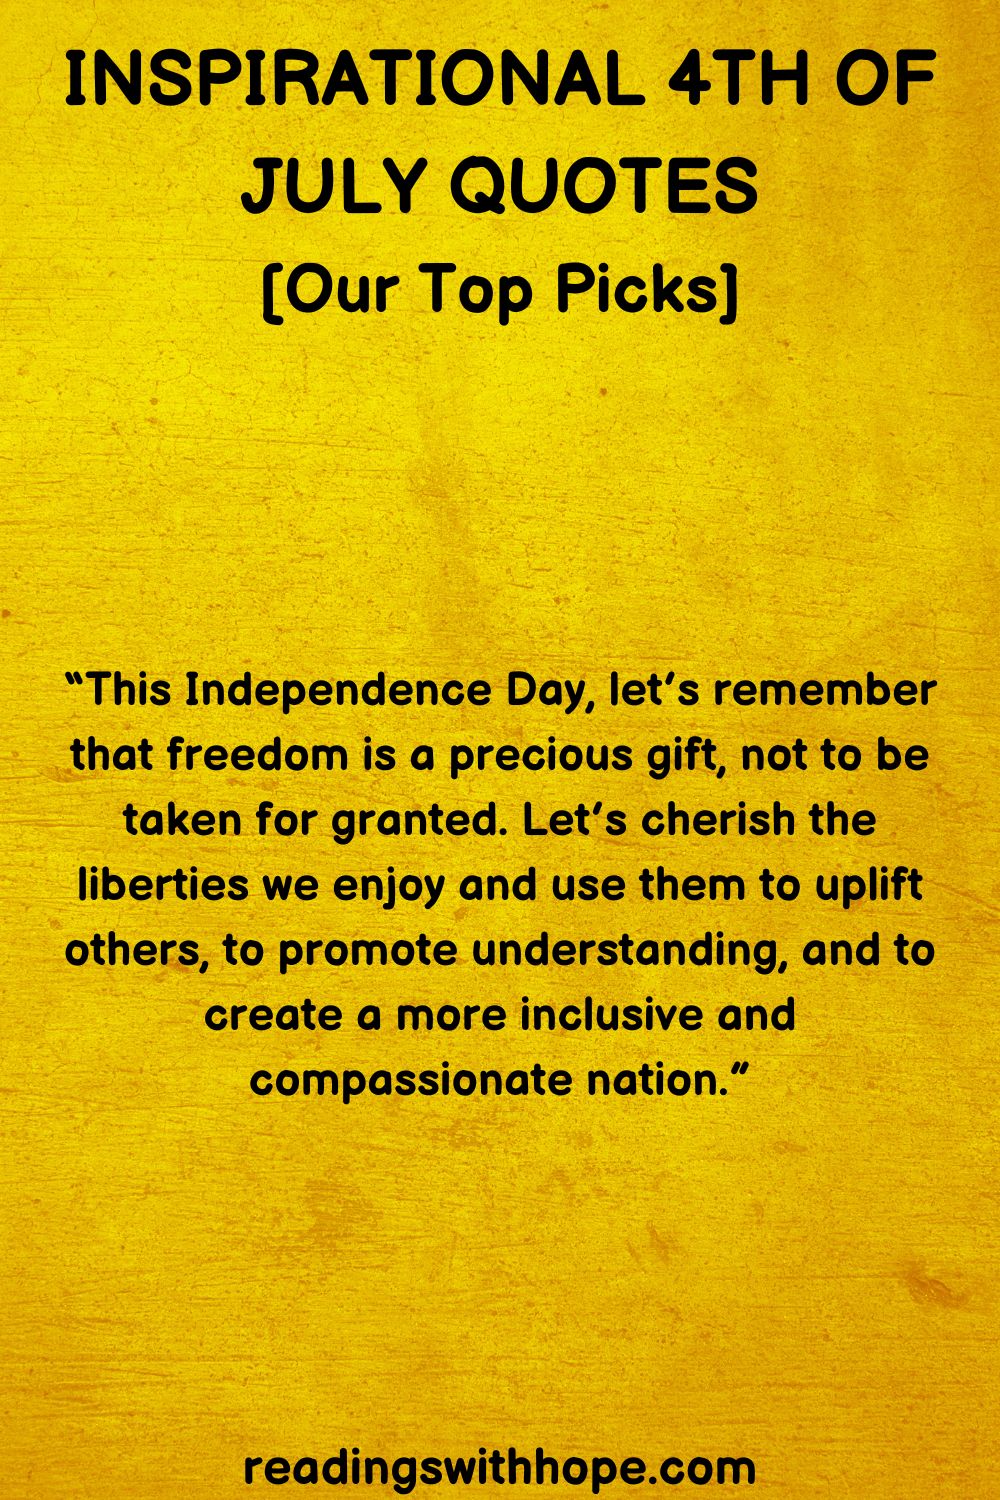 Inspirational 4th of July Quotes